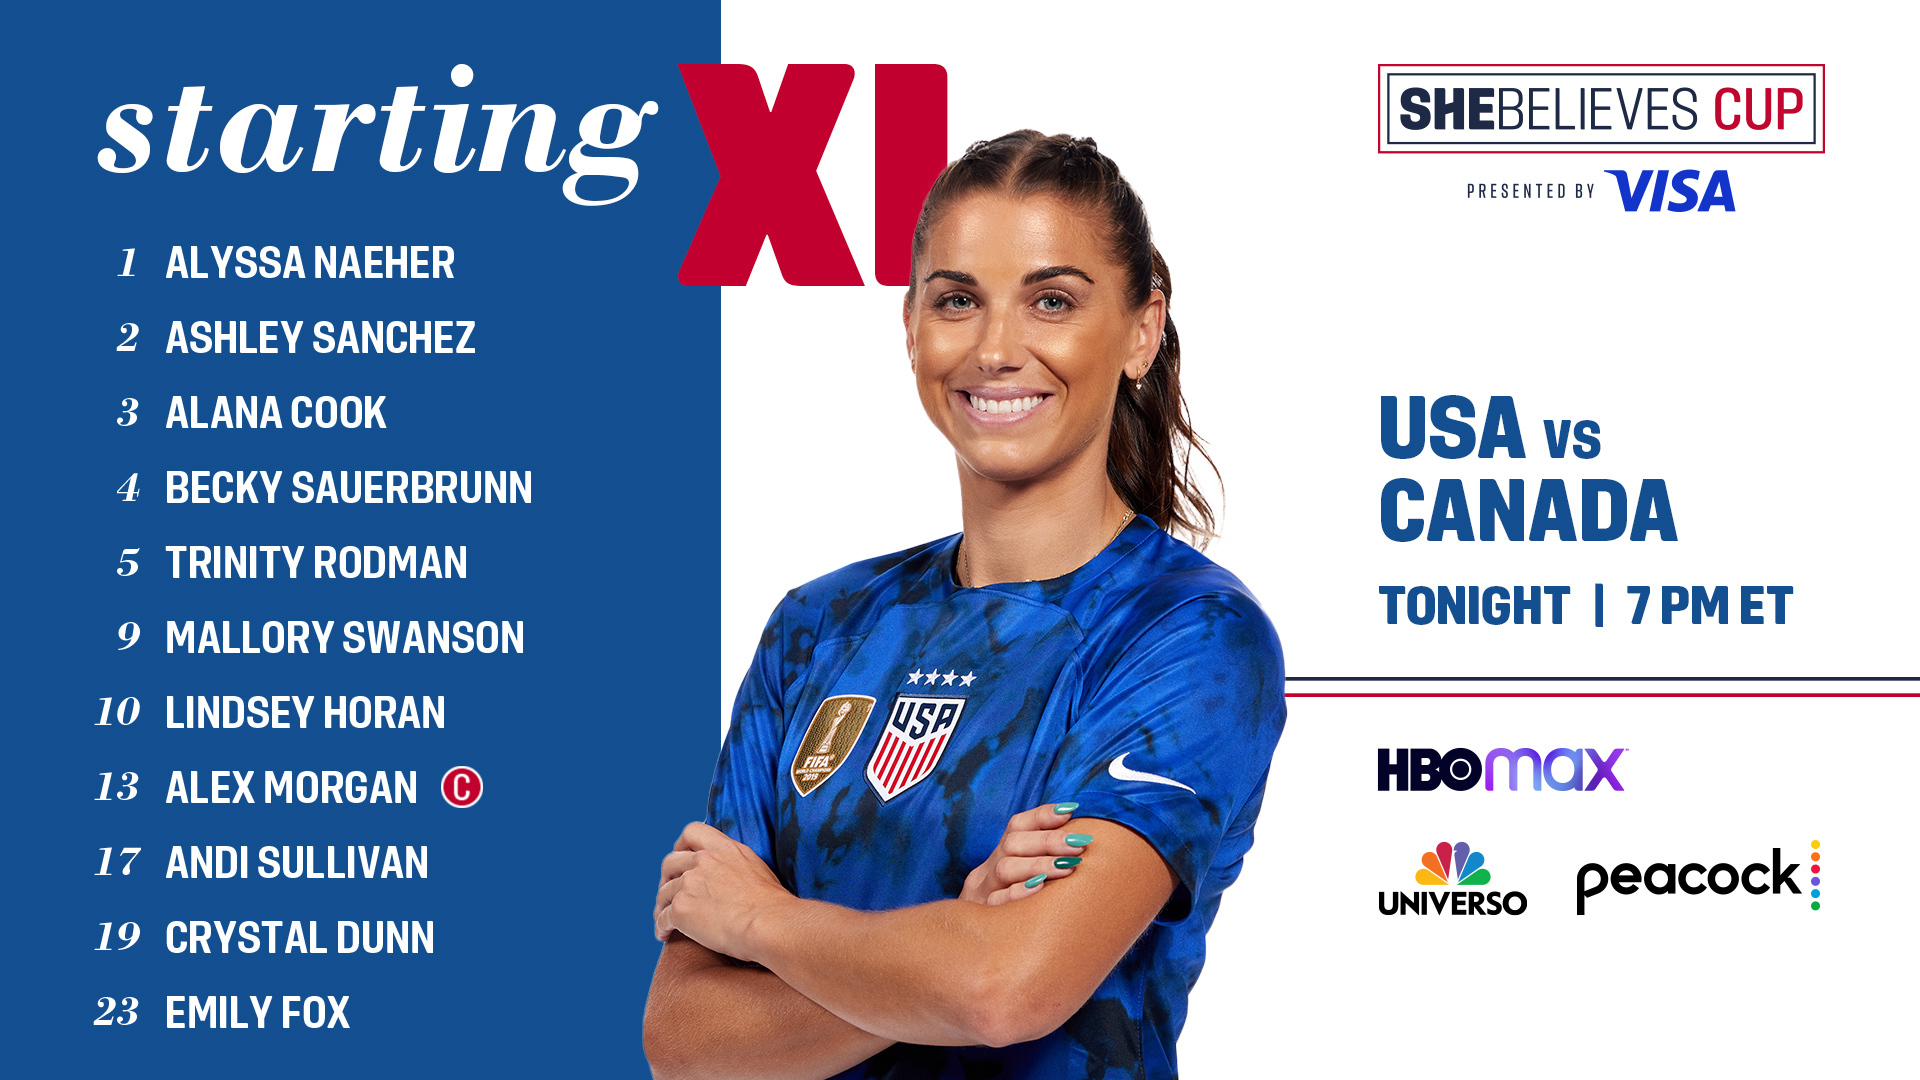 uswnt-vs-canada-2023-shebelieves-cup-presented-by-visa-u-s